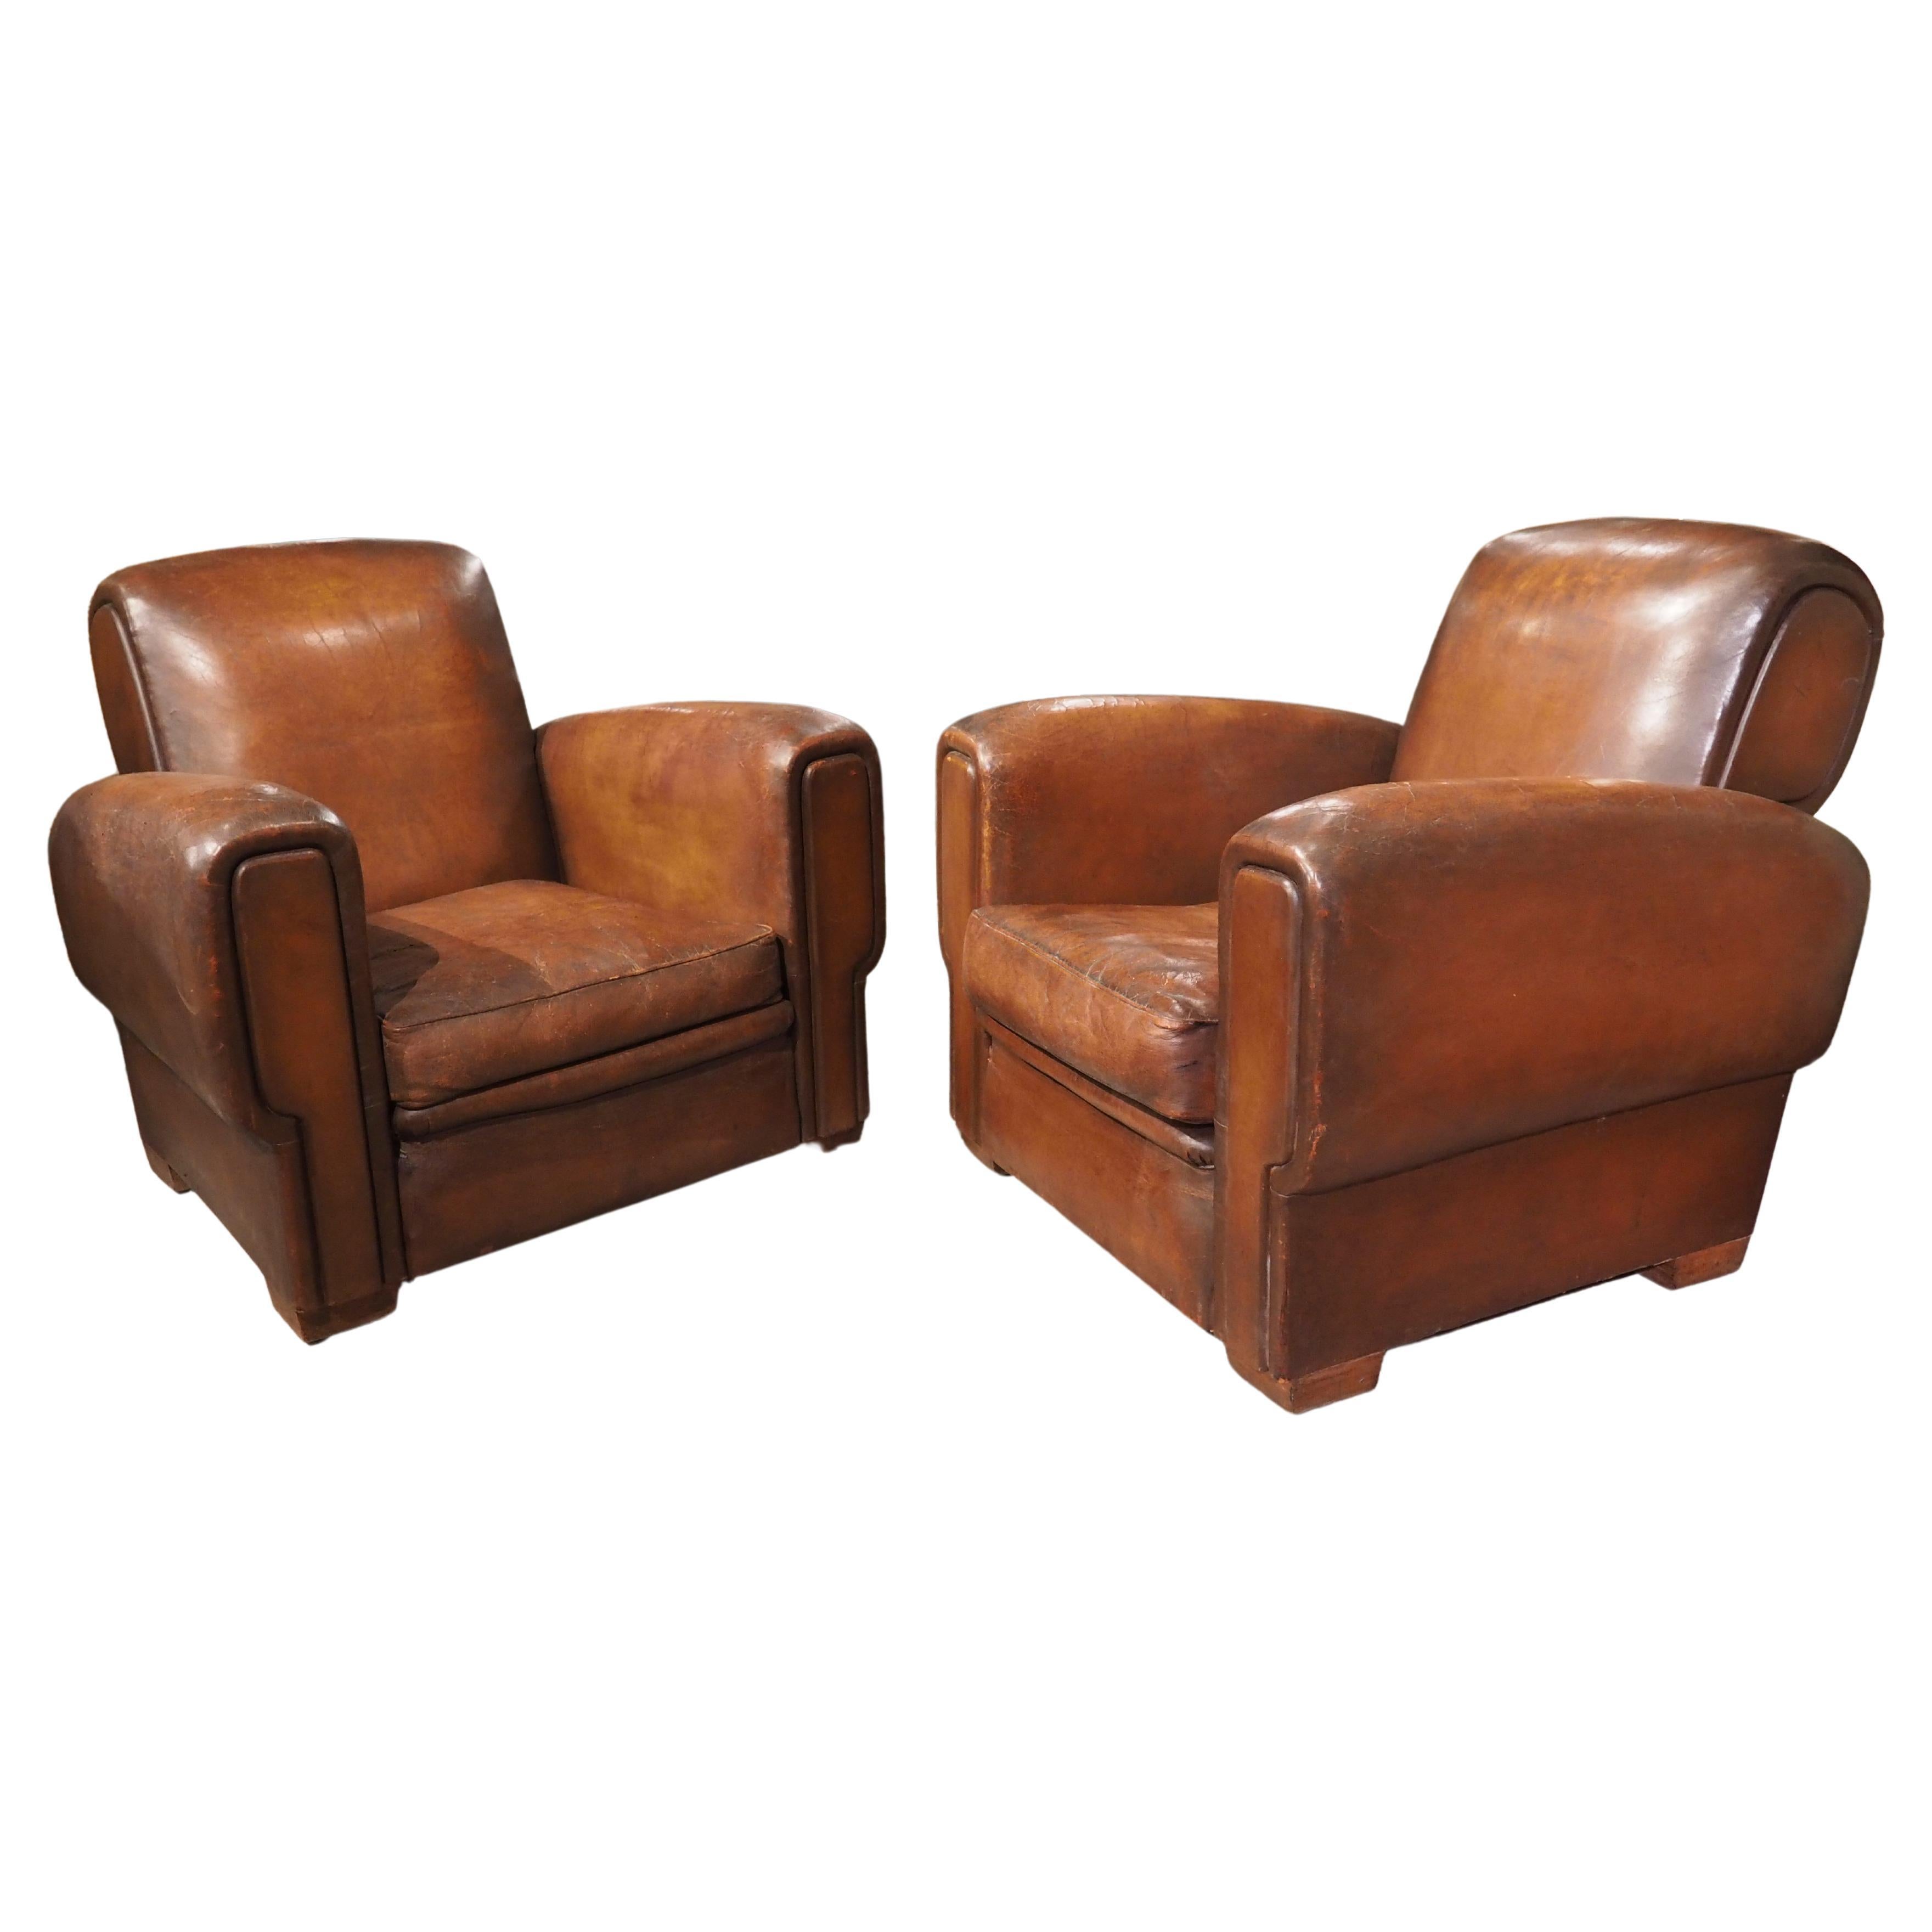 Pair of Large French Art Deco Leather Club Chairs, circa 1930s